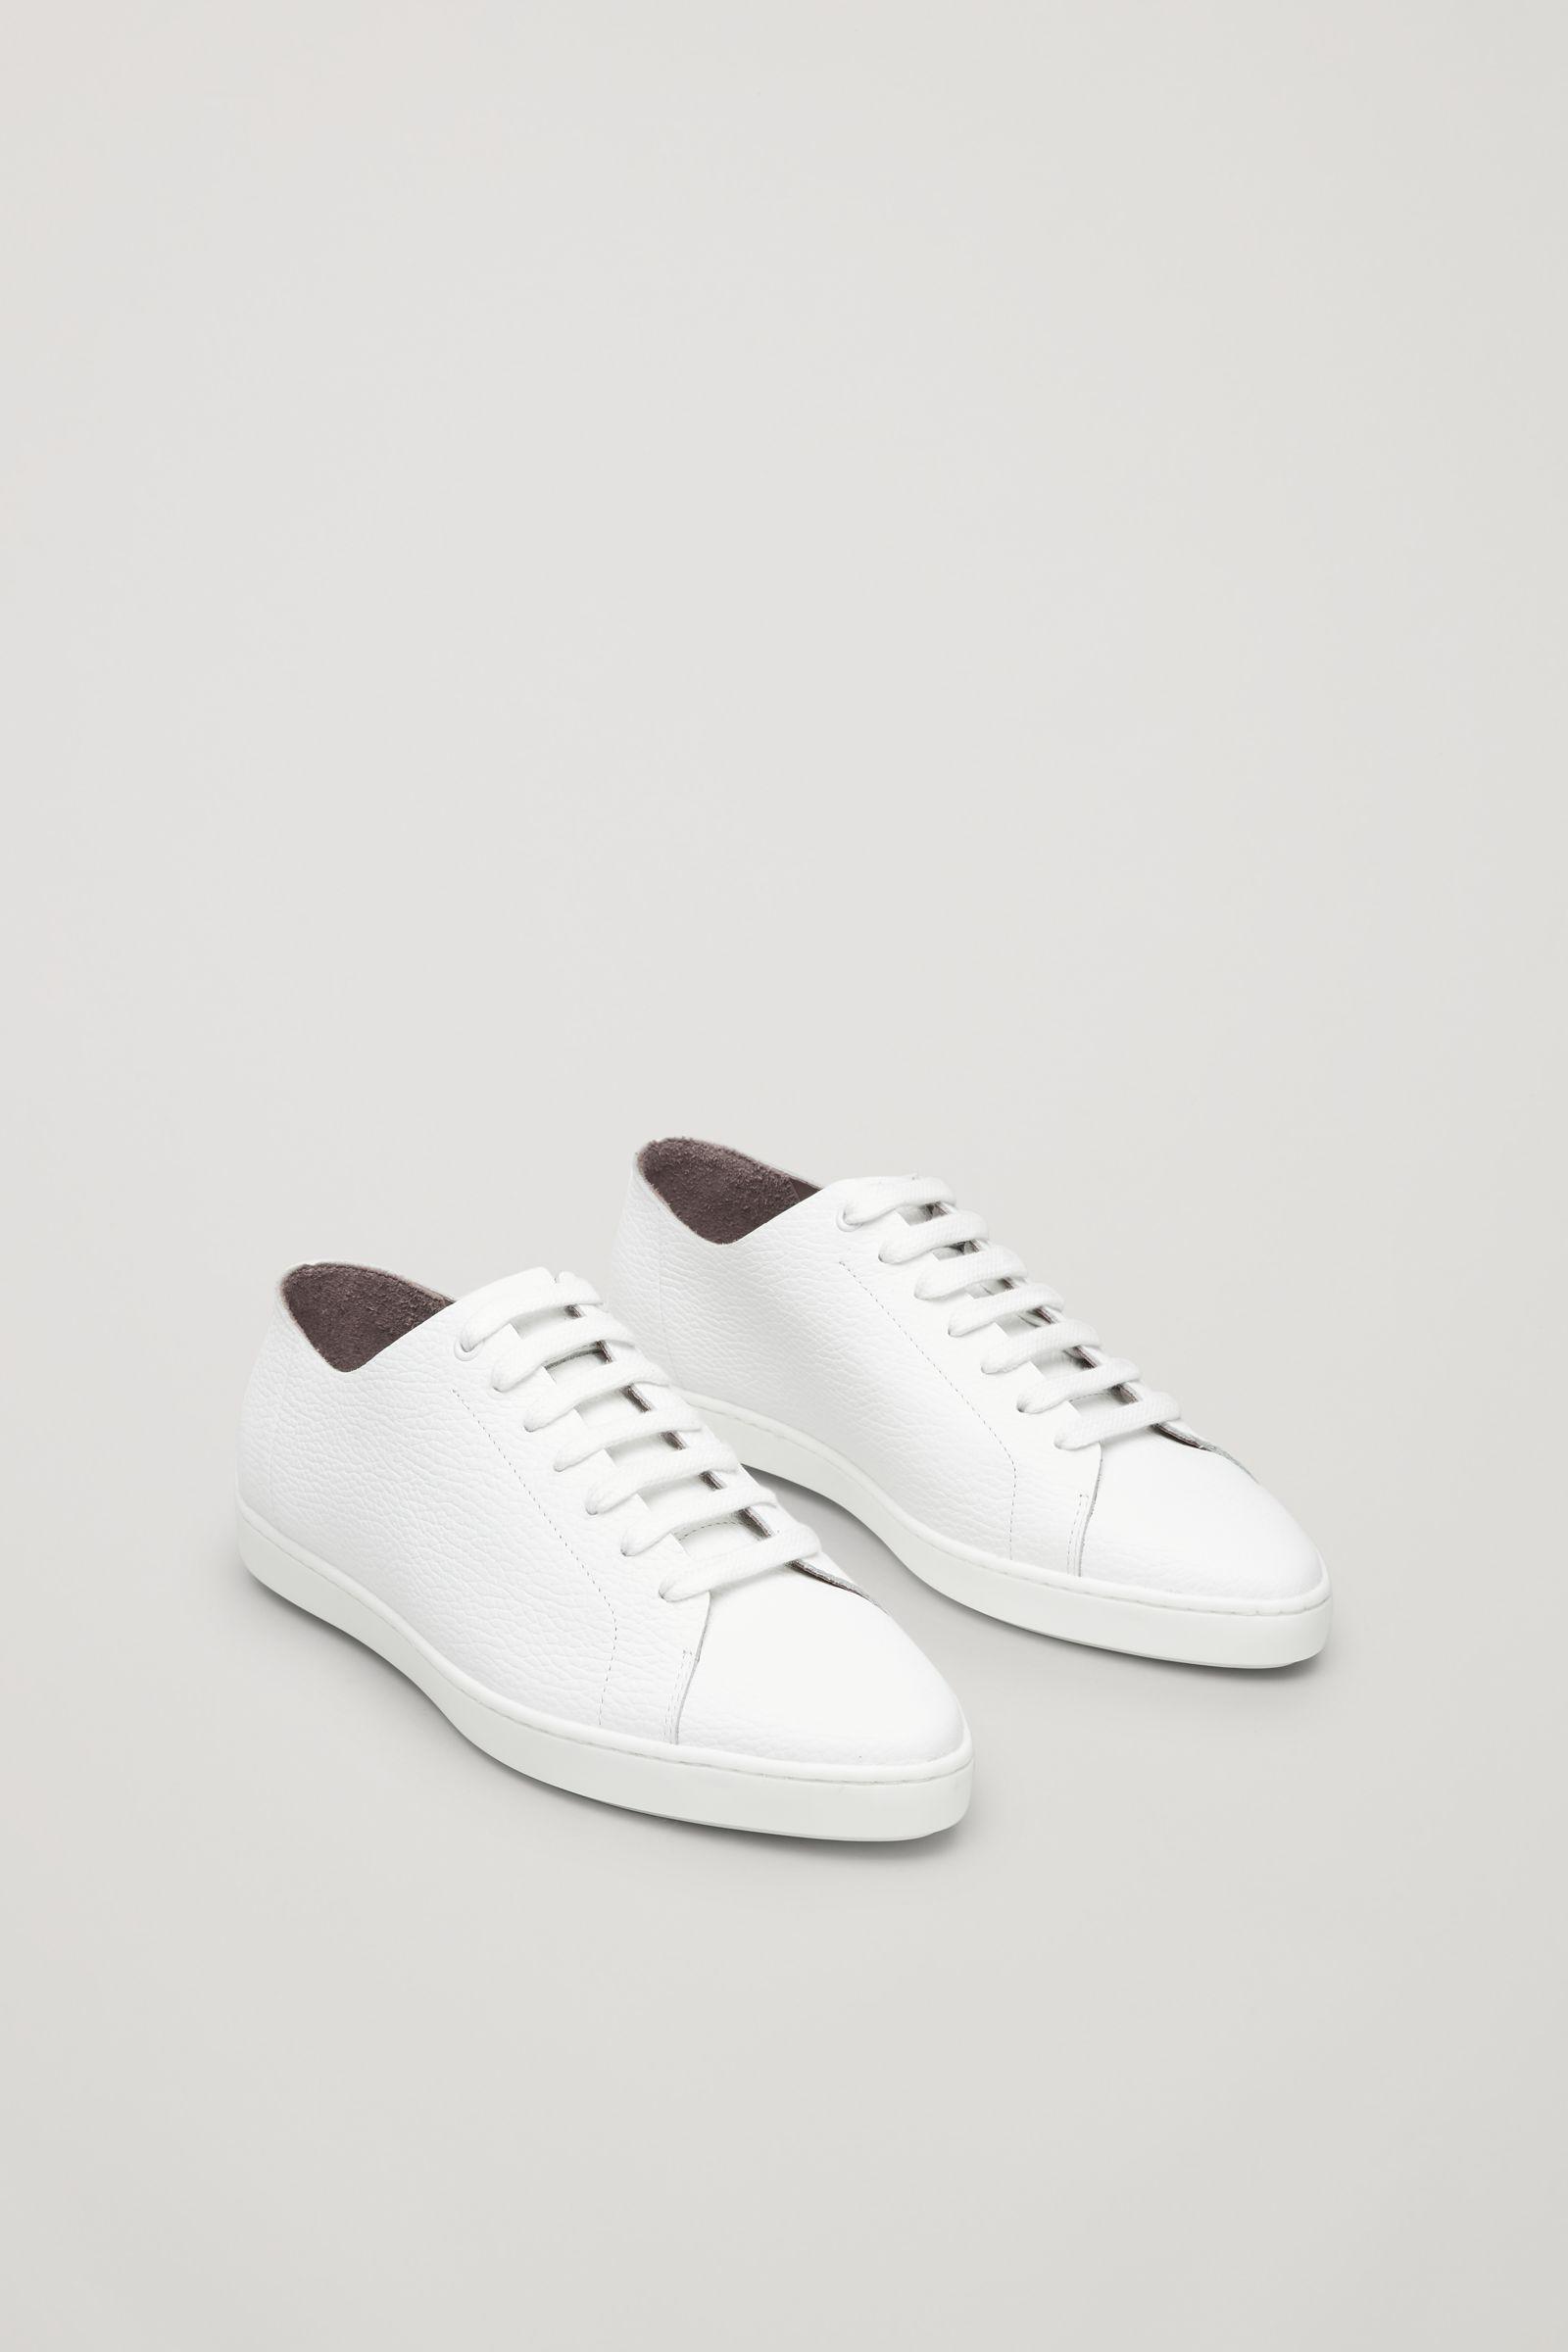 COS Leather Pointed Sneaker in White | Lyst